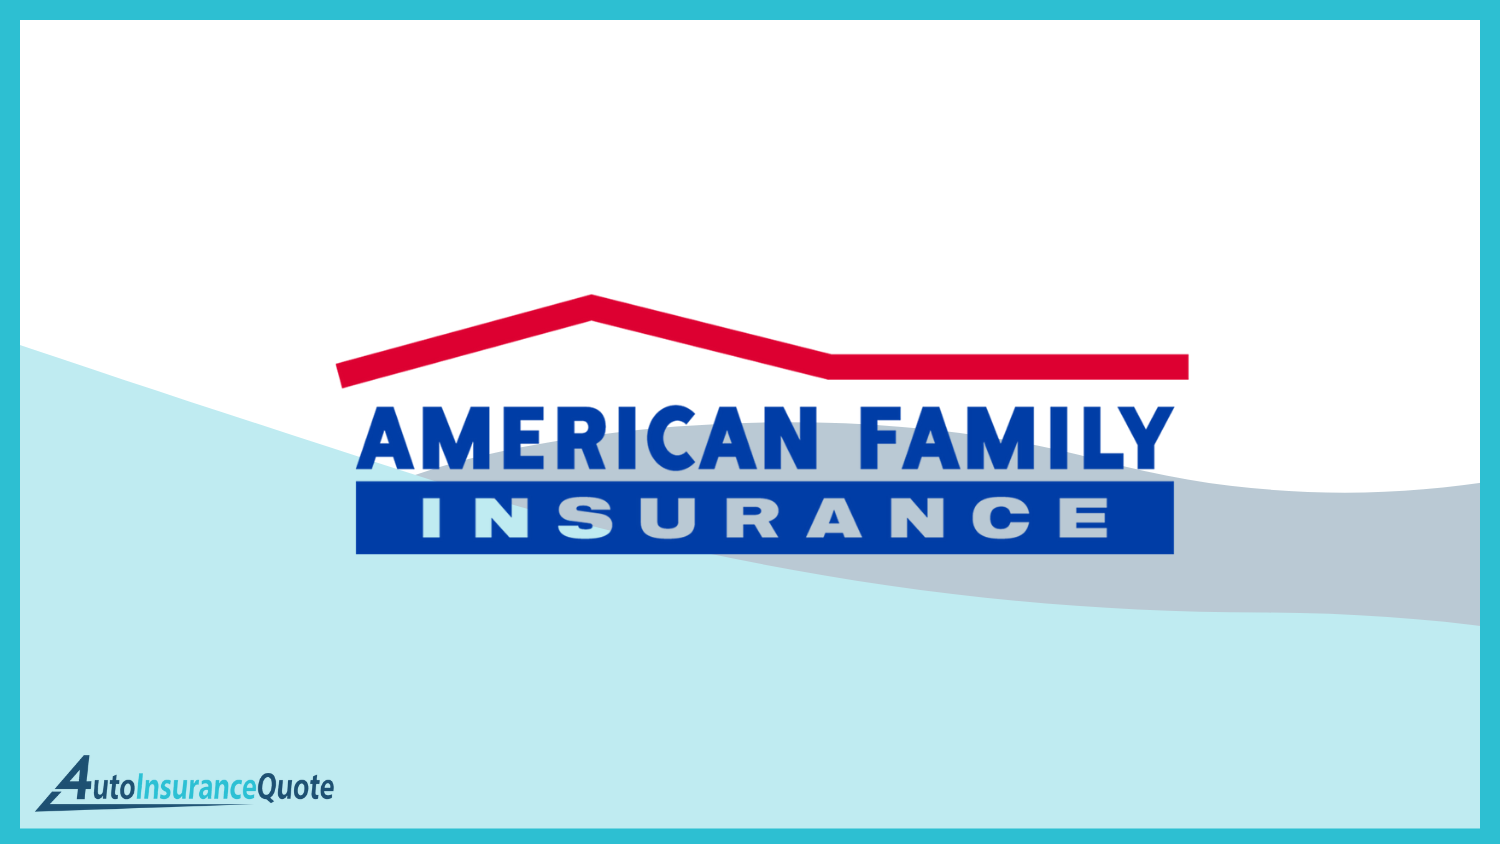 American Family: Best Auto Insurance for College Graduates